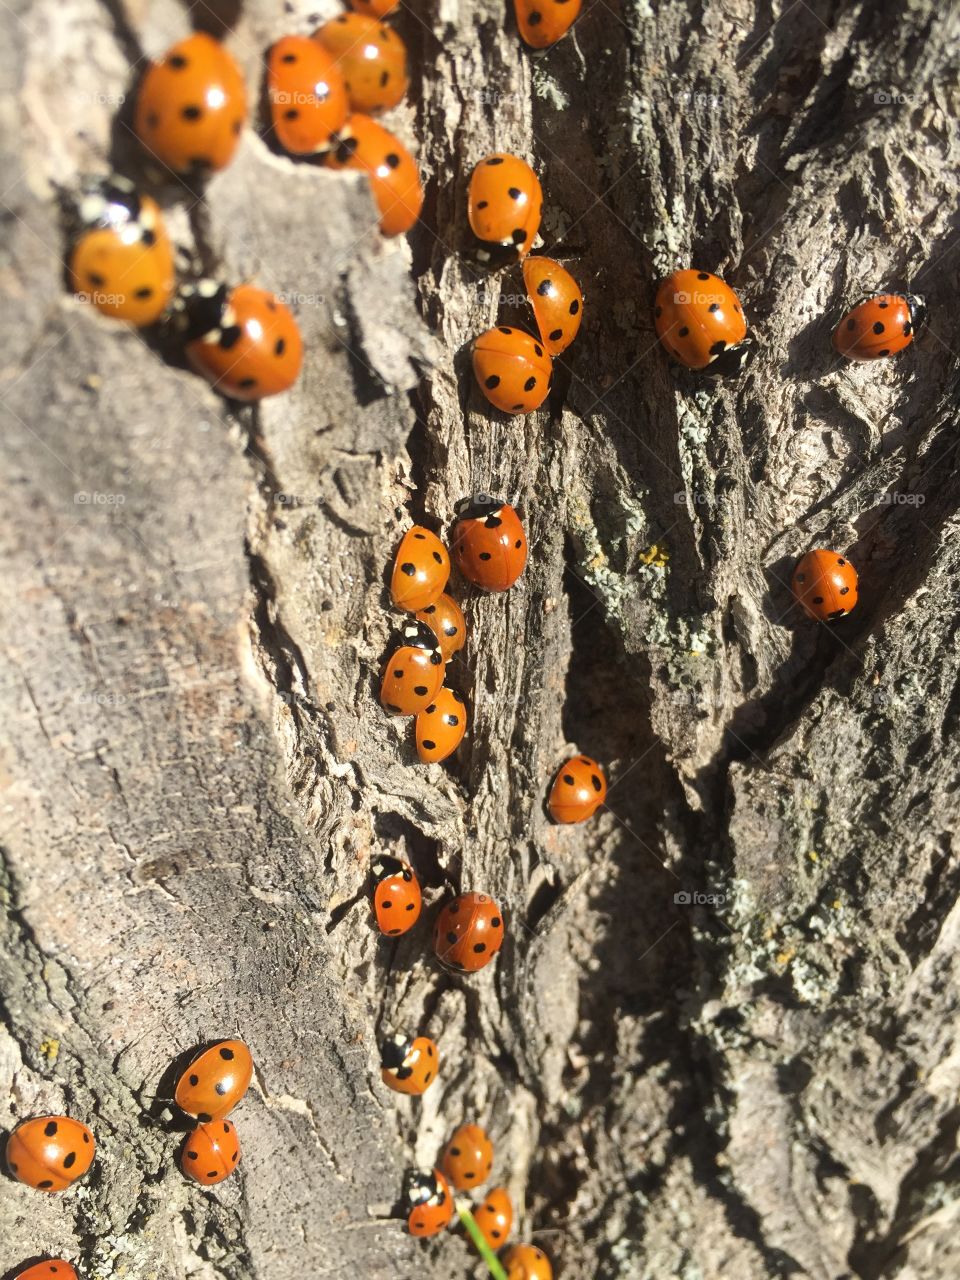 Home of the lady bugs 